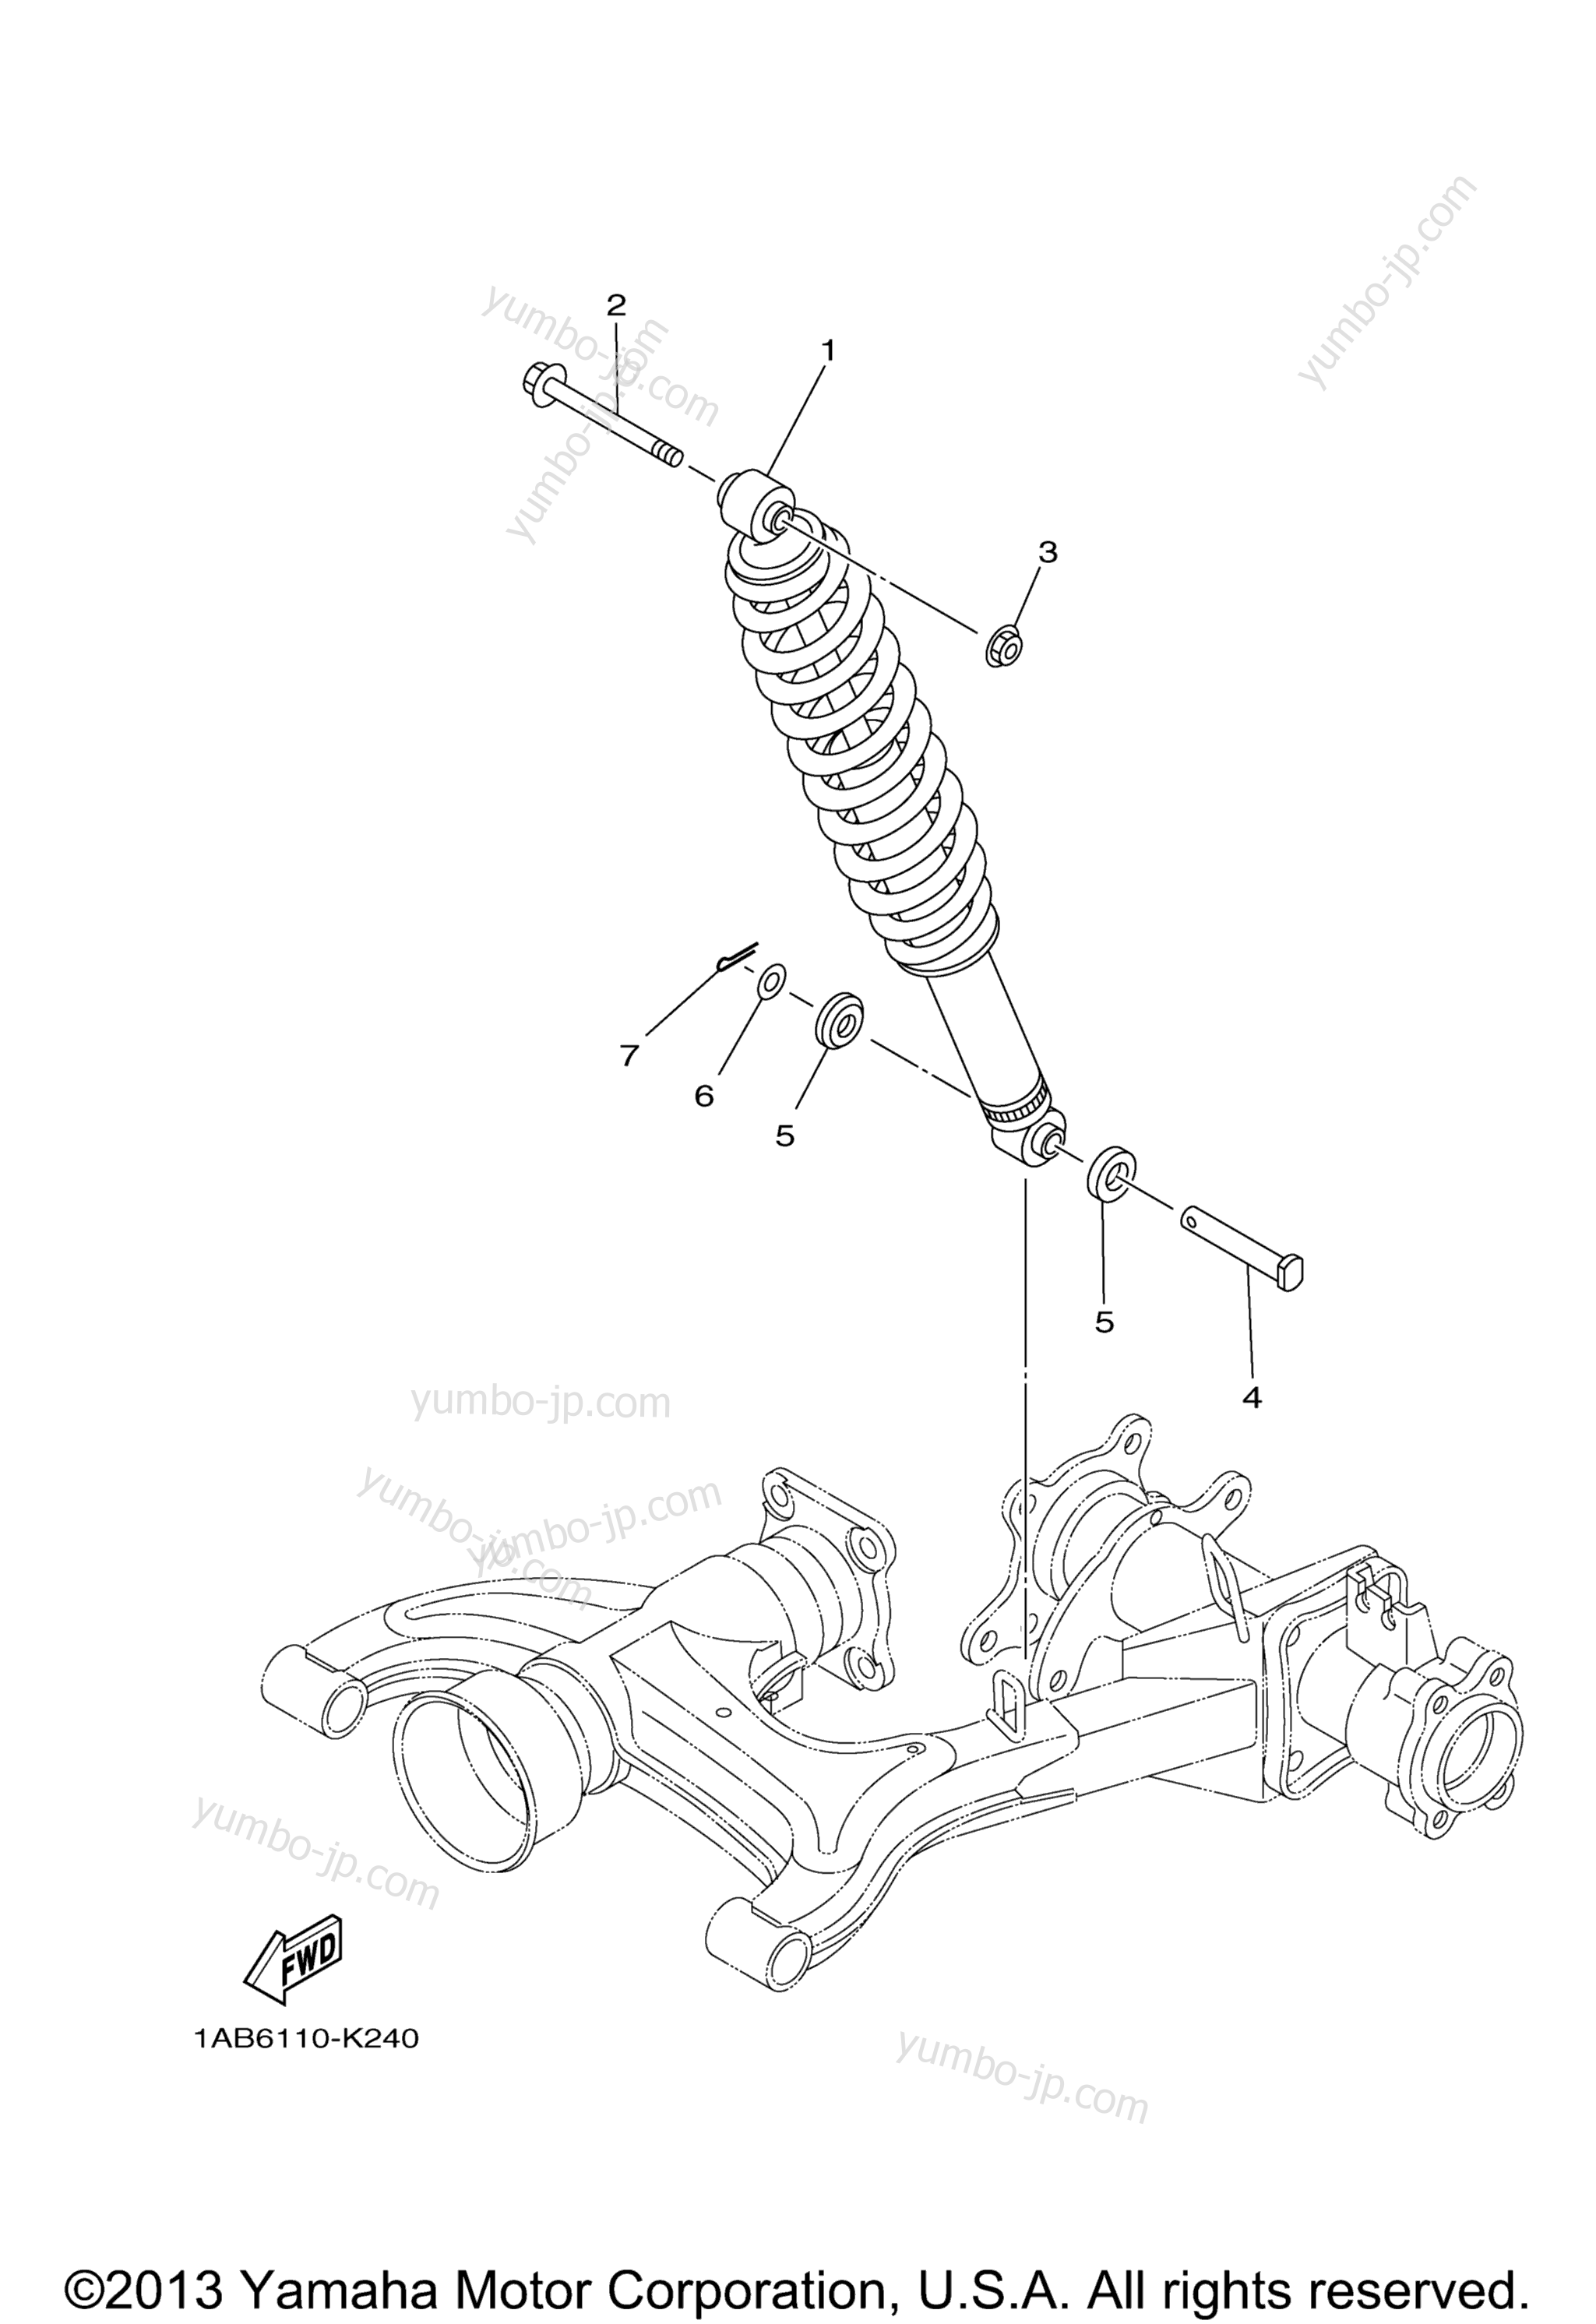 Rear Suspension for ATVs YAMAHA GRIZZLY 350 2WD (YFM35GAGR) 2011 year